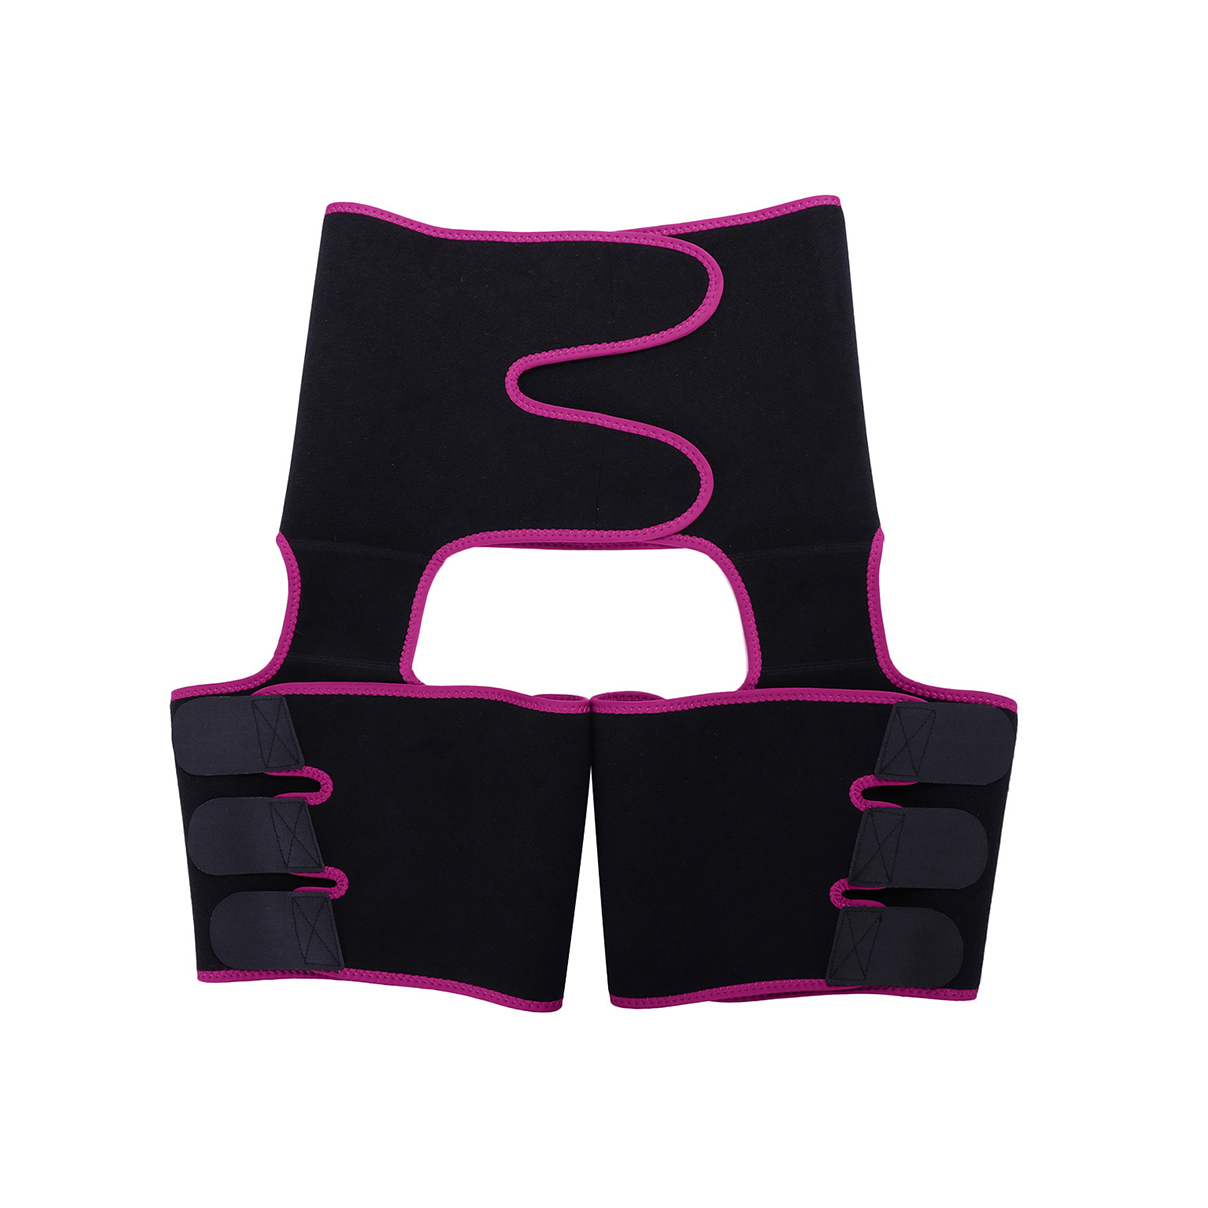 Neoprene-Thigh-Shaper-High-Waist-Body-Shaper-Slimmer-Wrap-Thermo-Trainer-Sport-Waist-Protective-Acce-1666105-5